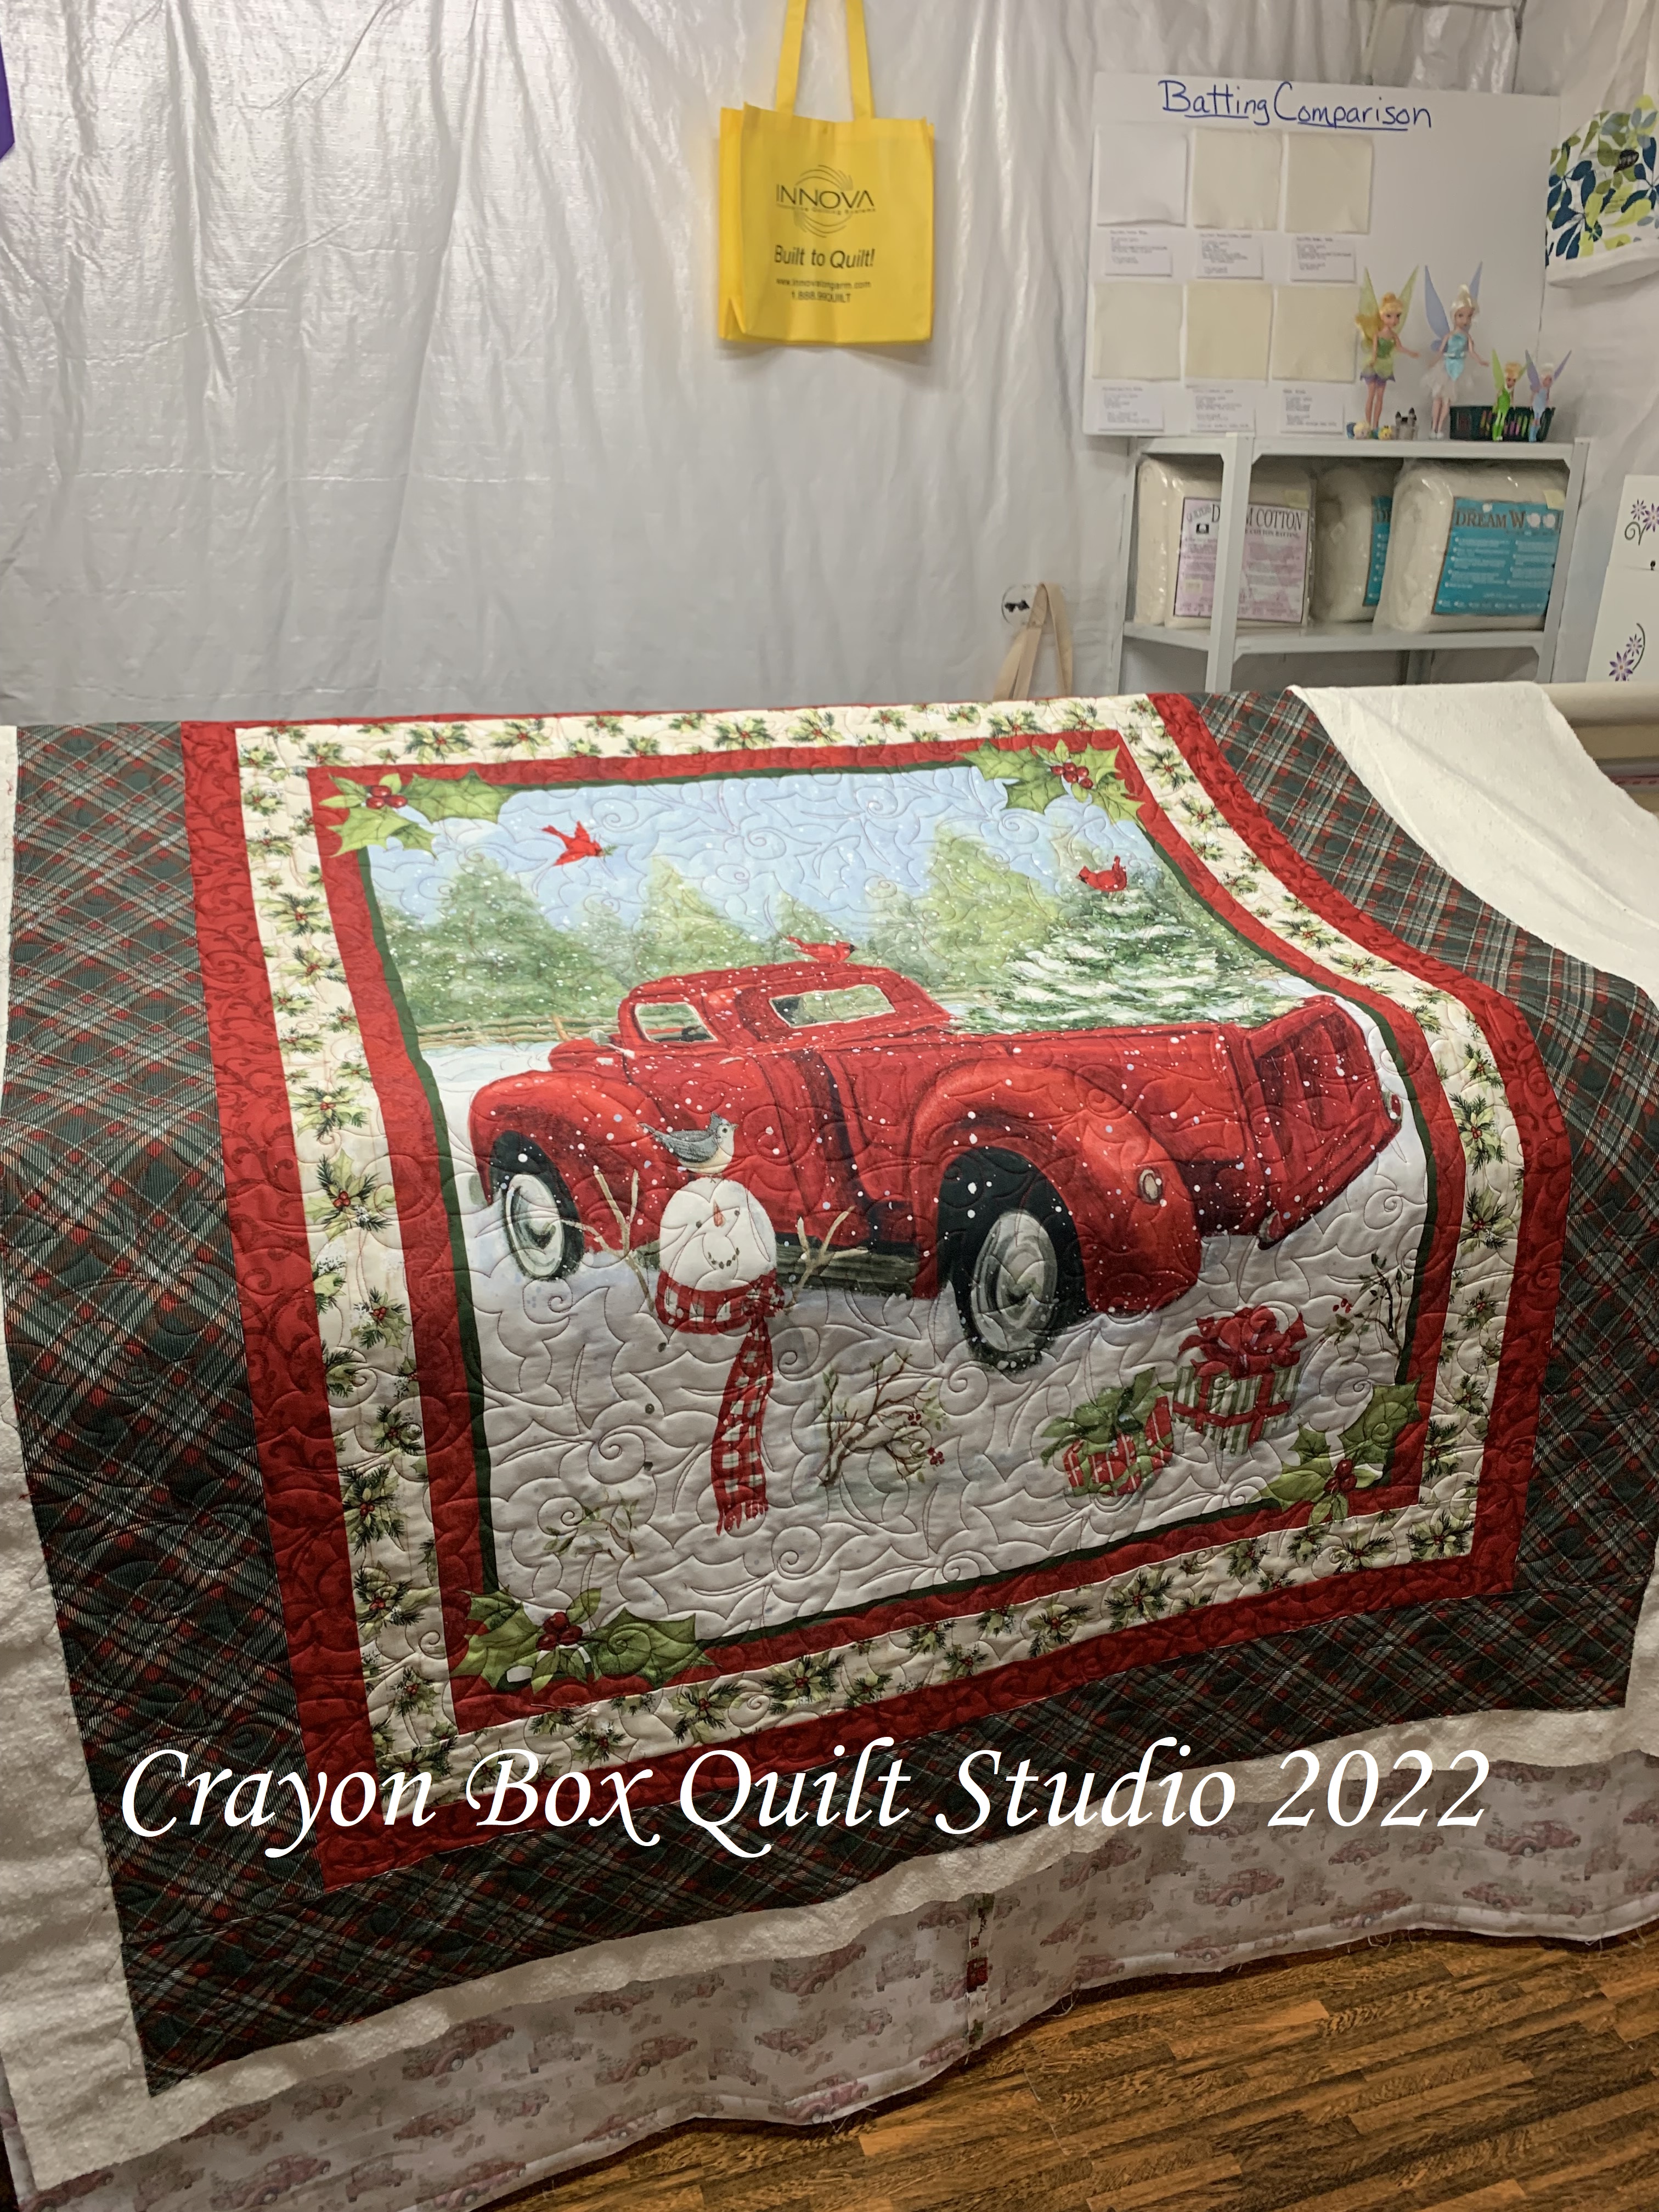 Papa's Old Truck Book Panel Kit – North Shore Quilting